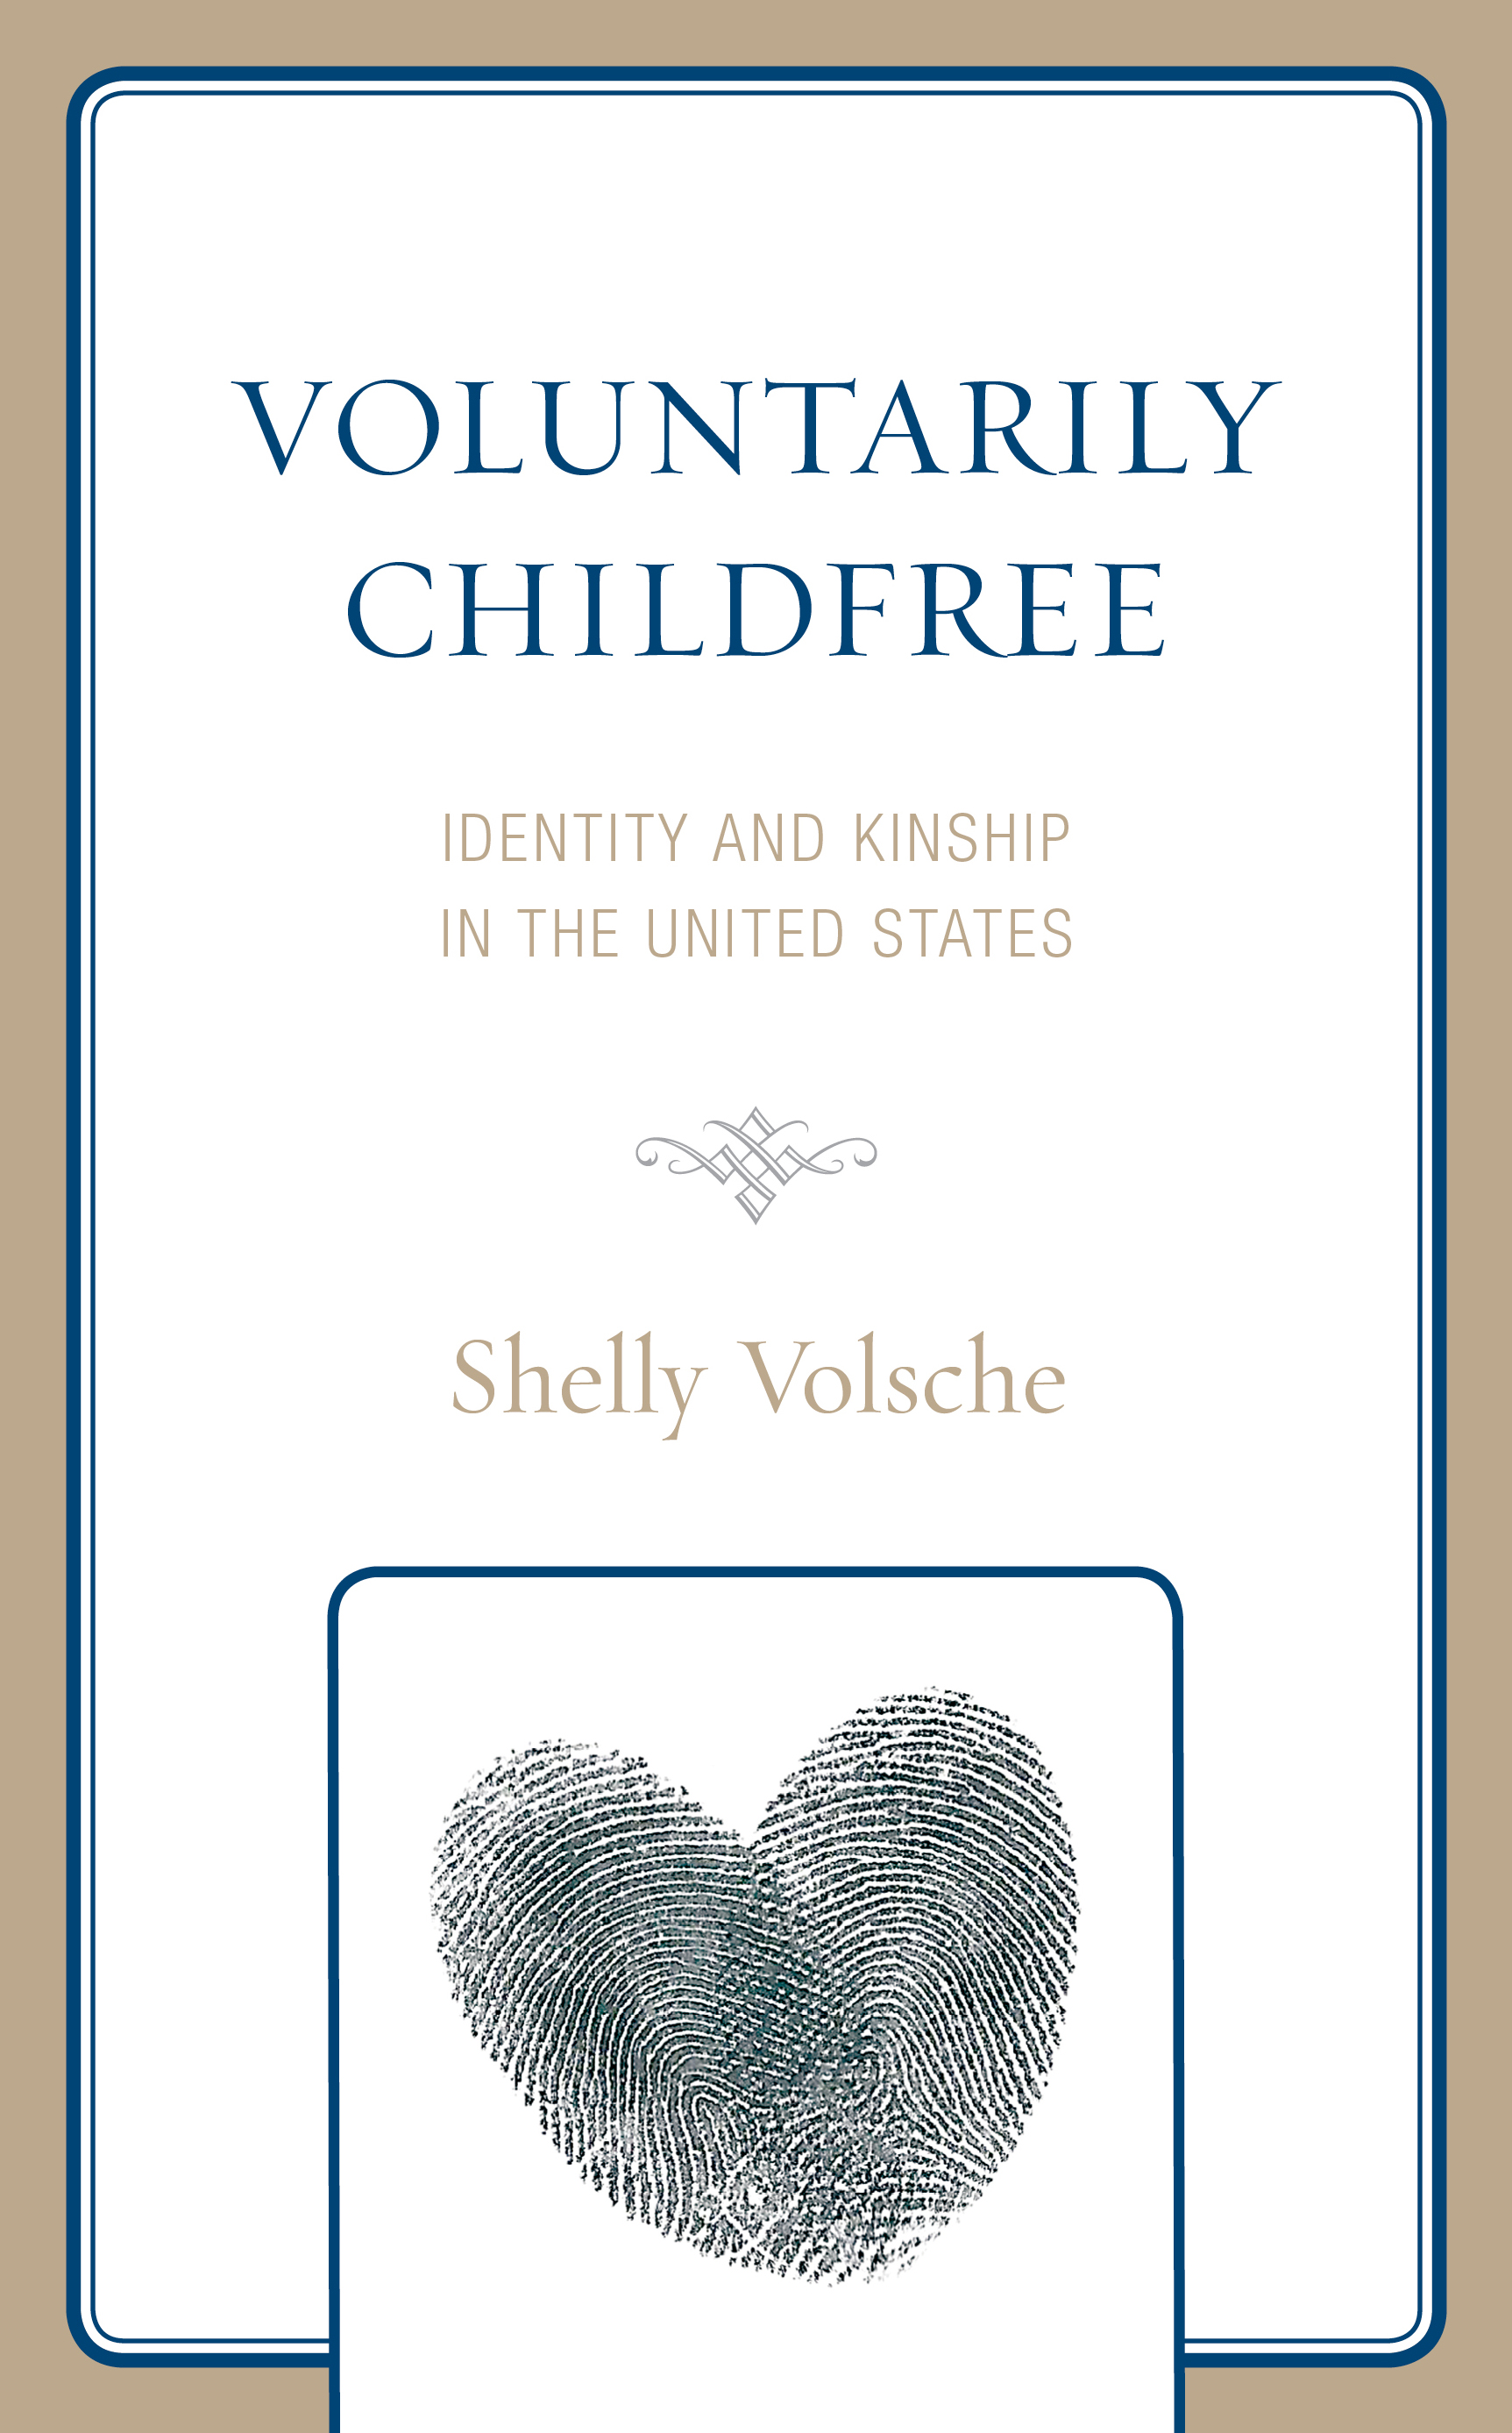 Voluntarily Childfree: Identity and Kinship in the United States